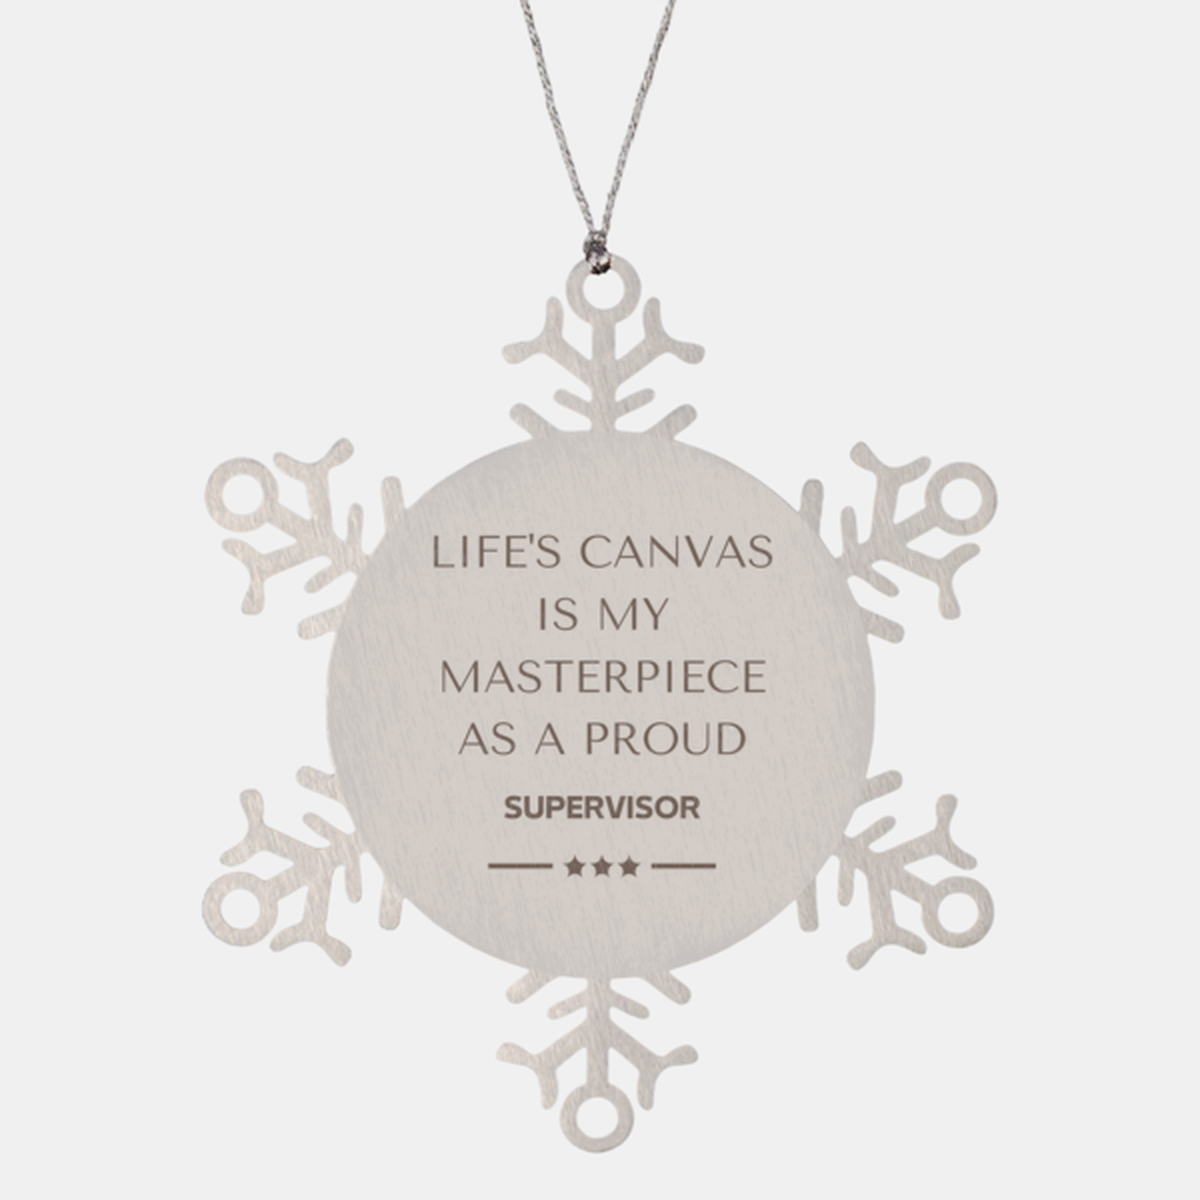 Proud Supervisor Gifts, Life's canvas is my masterpiece, Epic Birthday Christmas Unique Snowflake Ornament For Supervisor, Coworkers, Men, Women, Friends